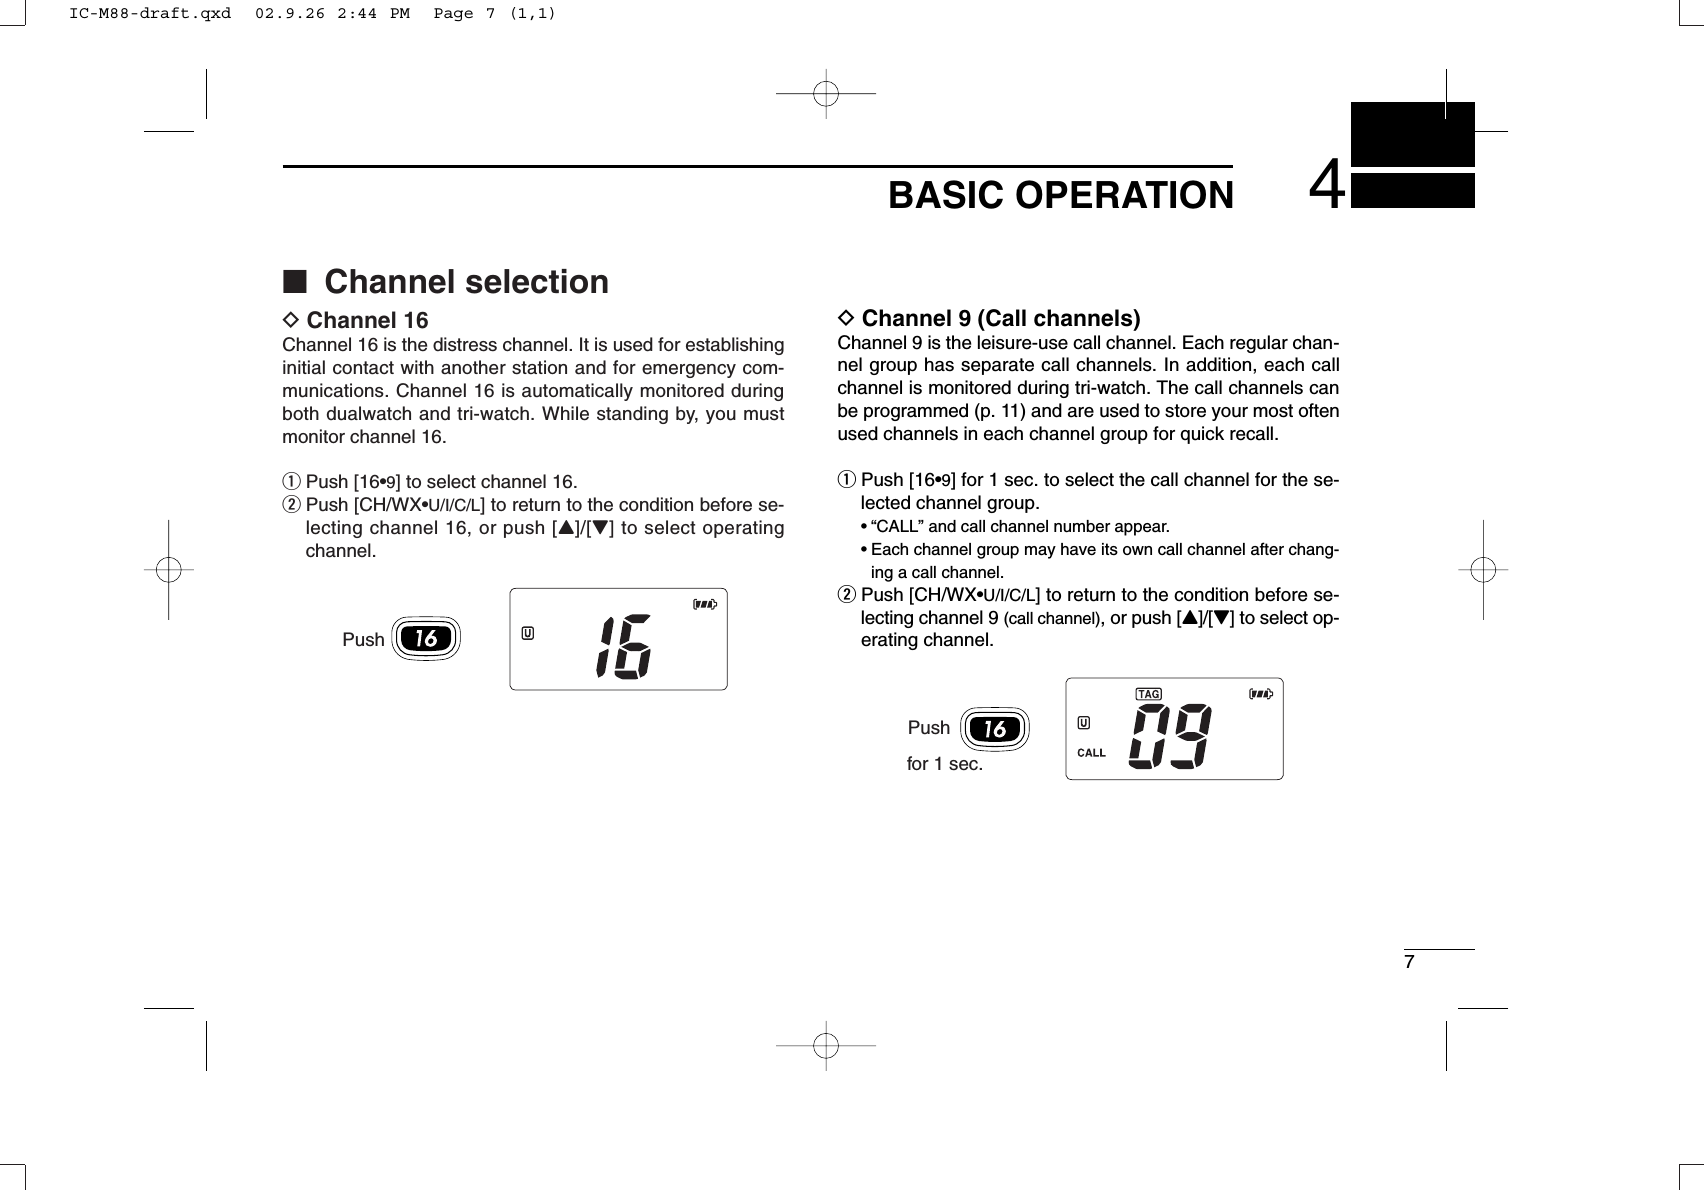 74BASIC OPERATIONDChannel 9 (Call channels)Channel 9 is the leisure-use call channel. Each regular chan-nel group has separate call channels. In addition, each callchannel is monitored during tri-watch. The call channels canbe programmed (p. 11) and are used to store your most oftenused channels in each channel group for quick recall.qPush [16•9] for 1 sec. to select the call channel for the se-lected channel group.•“CALL” and call channel number appear. •Each channel group may have its own call channel after chang-ing a call channel.wPush [CH/WX•U/I/C/L] to return to the condition before se-lecting channel 9 (call channel), or push [Y]/[Z] to select op-erating channel.■Channel selectionDChannel 16Channel 16 is the distress channel. It is used for establishinginitial contact with another station and for emergency com-munications. Channel 16 is automatically monitored duringboth dualwatch and tri-watch. While standing by, you mustmonitor channel 16.qPush [16•9] to select channel 16.wPush [CH/WX•U/I/C/L] to return to the condition before se-lecting channel 16, or push [Y]/[Z] to select operatingchannel.PushPushfor 1 sec.IC-M88-draft.qxd  02.9.26 2:44 PM  Page 7 (1,1)